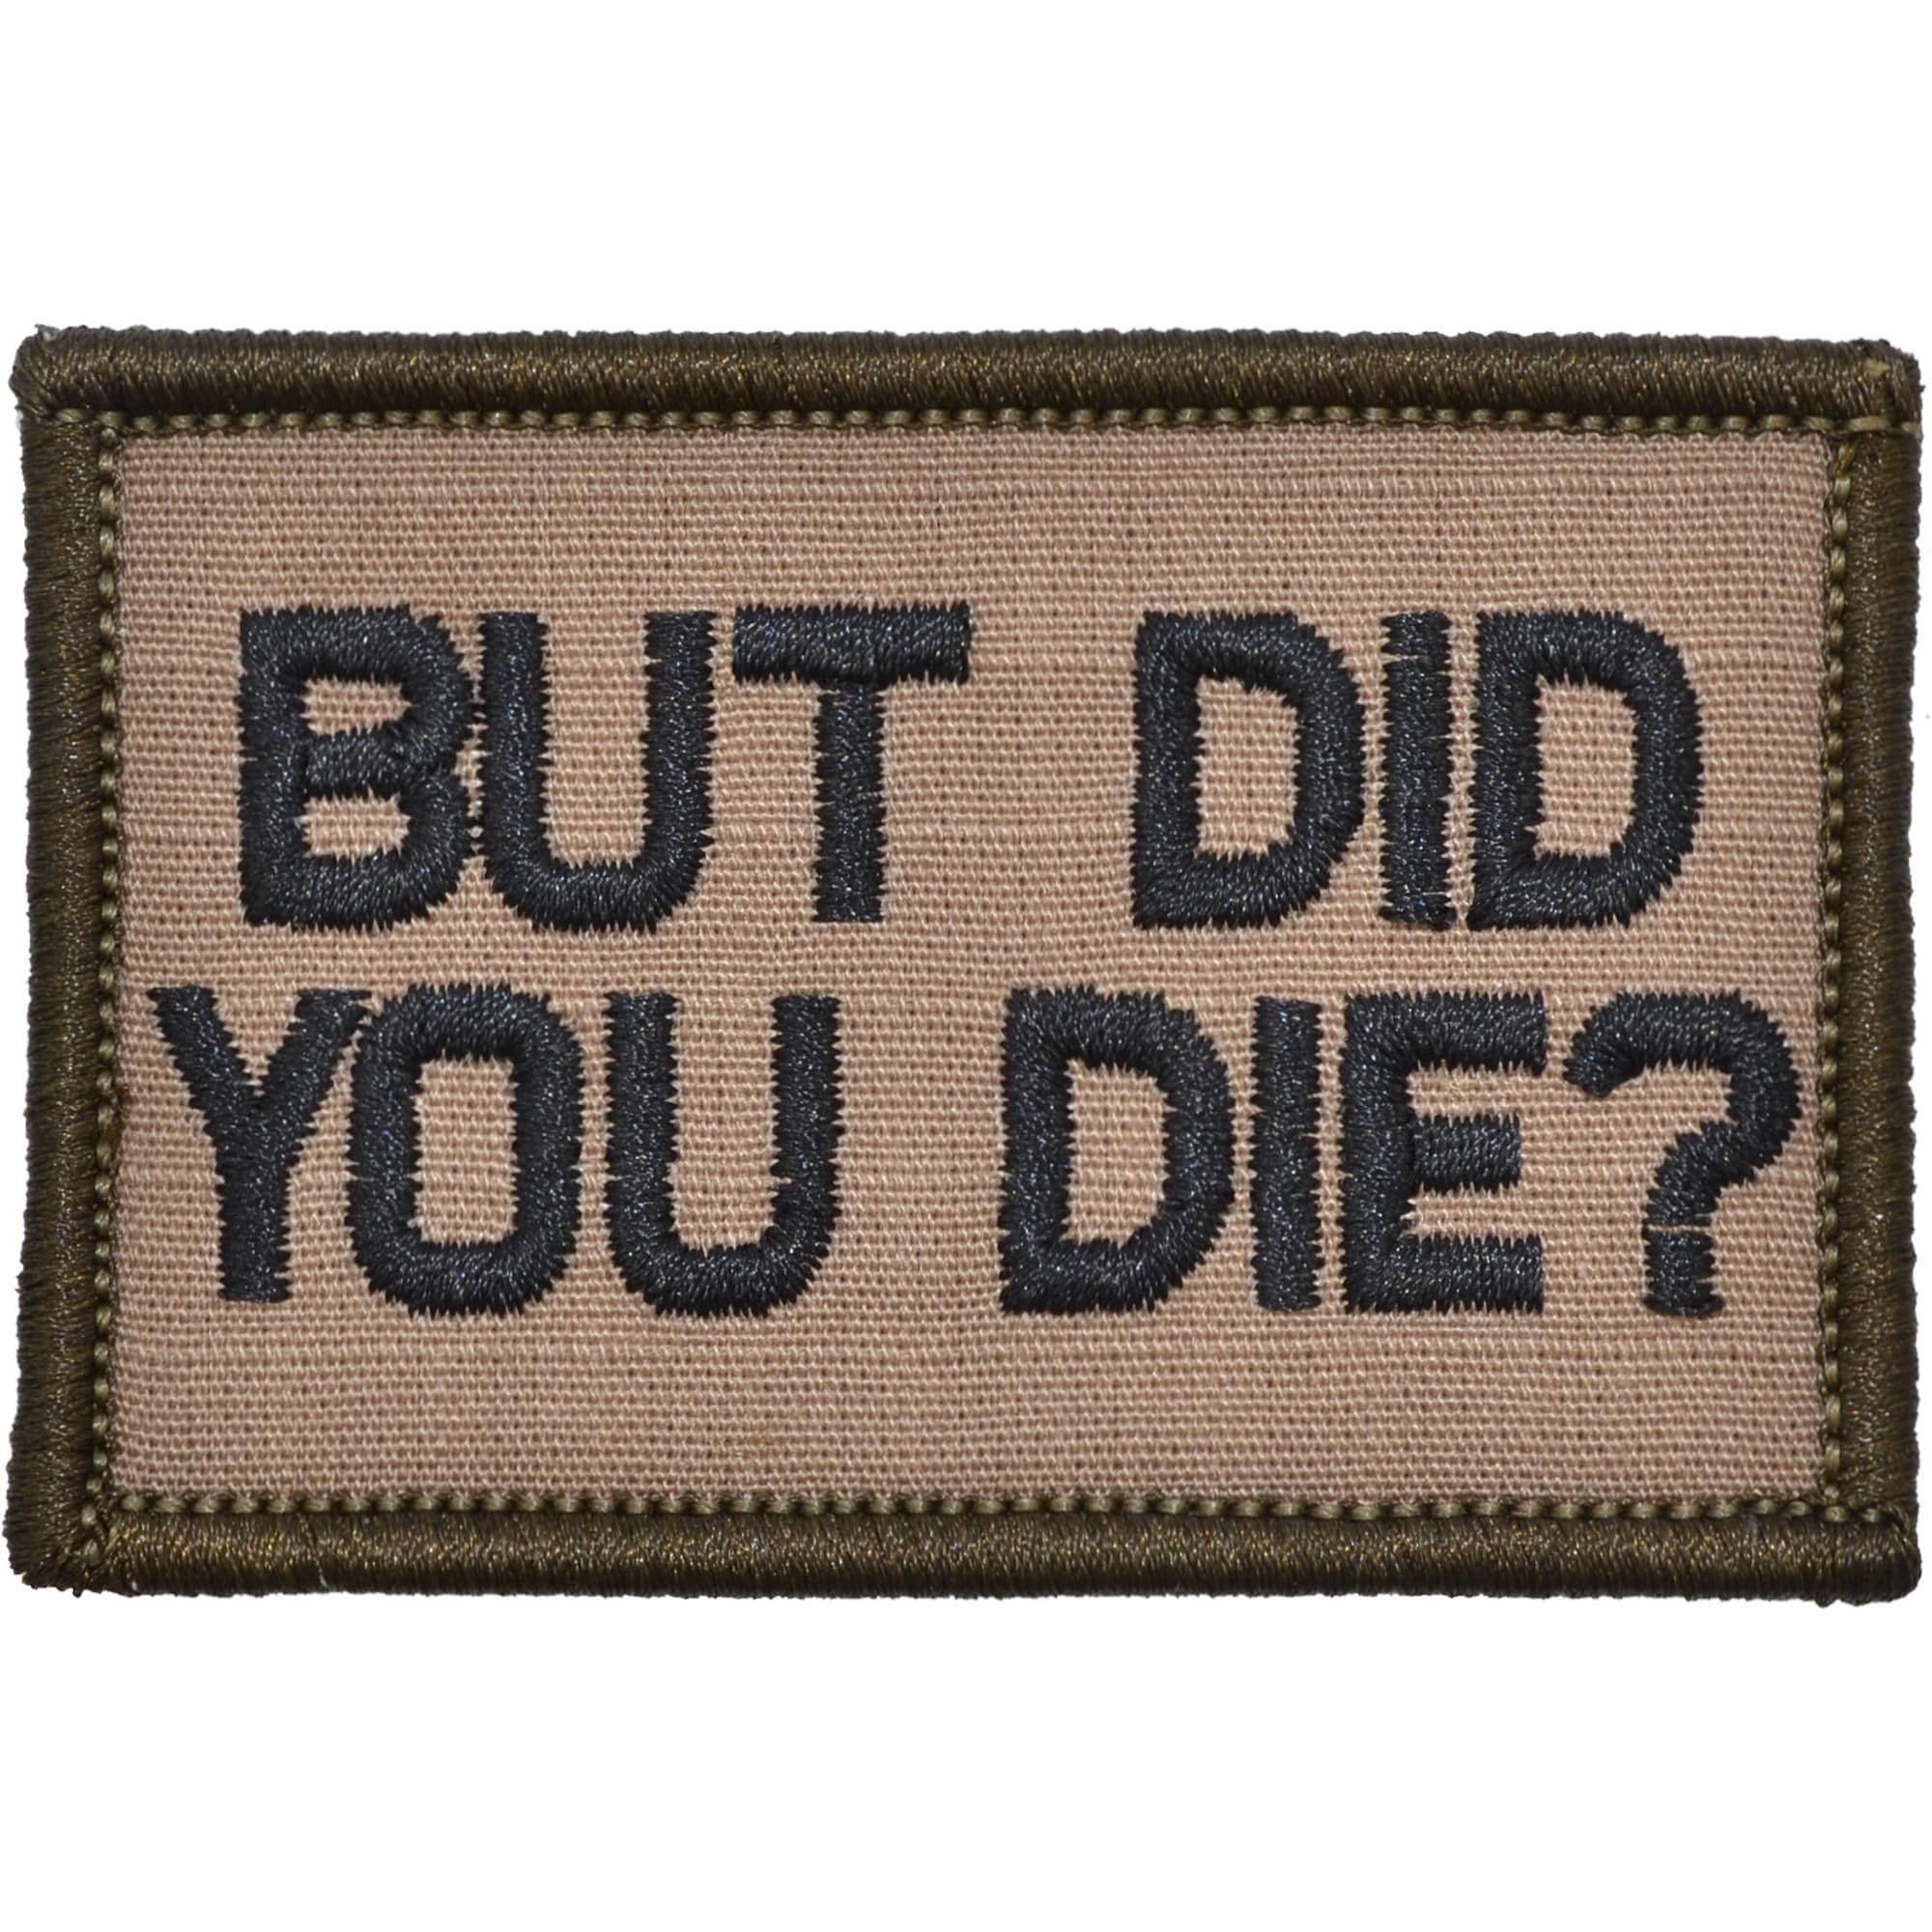 Tactical Gear Junkie Patches Coyote Brown w/ Black But Did You Die? - 2x3 Patch